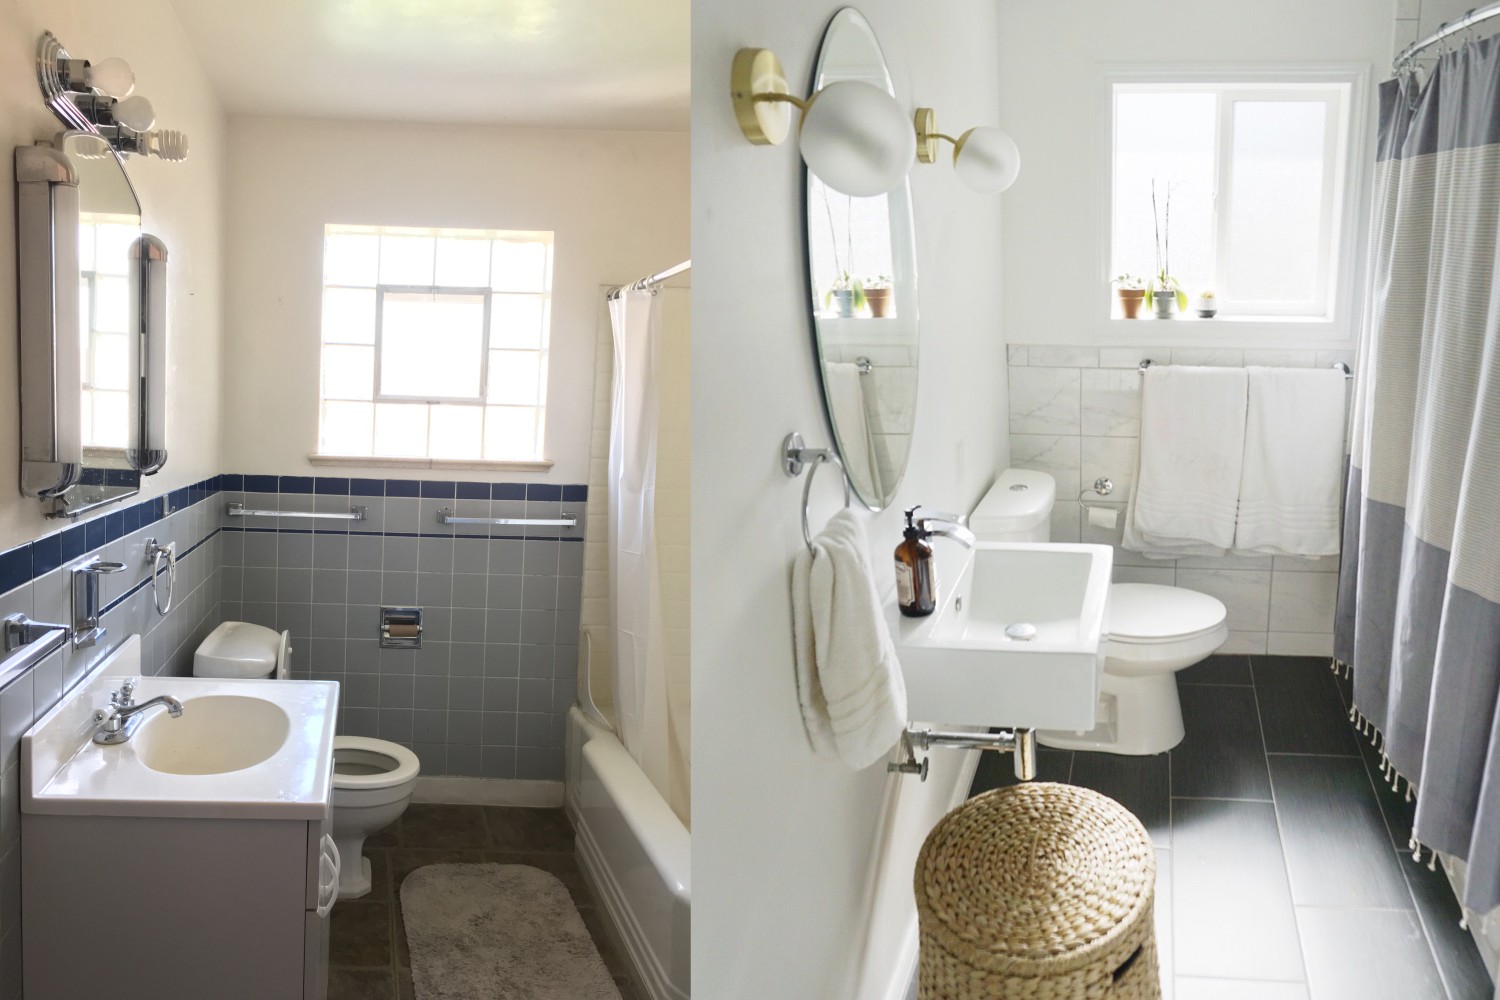 13 things I wish I'd known before buying a fixer-upper house